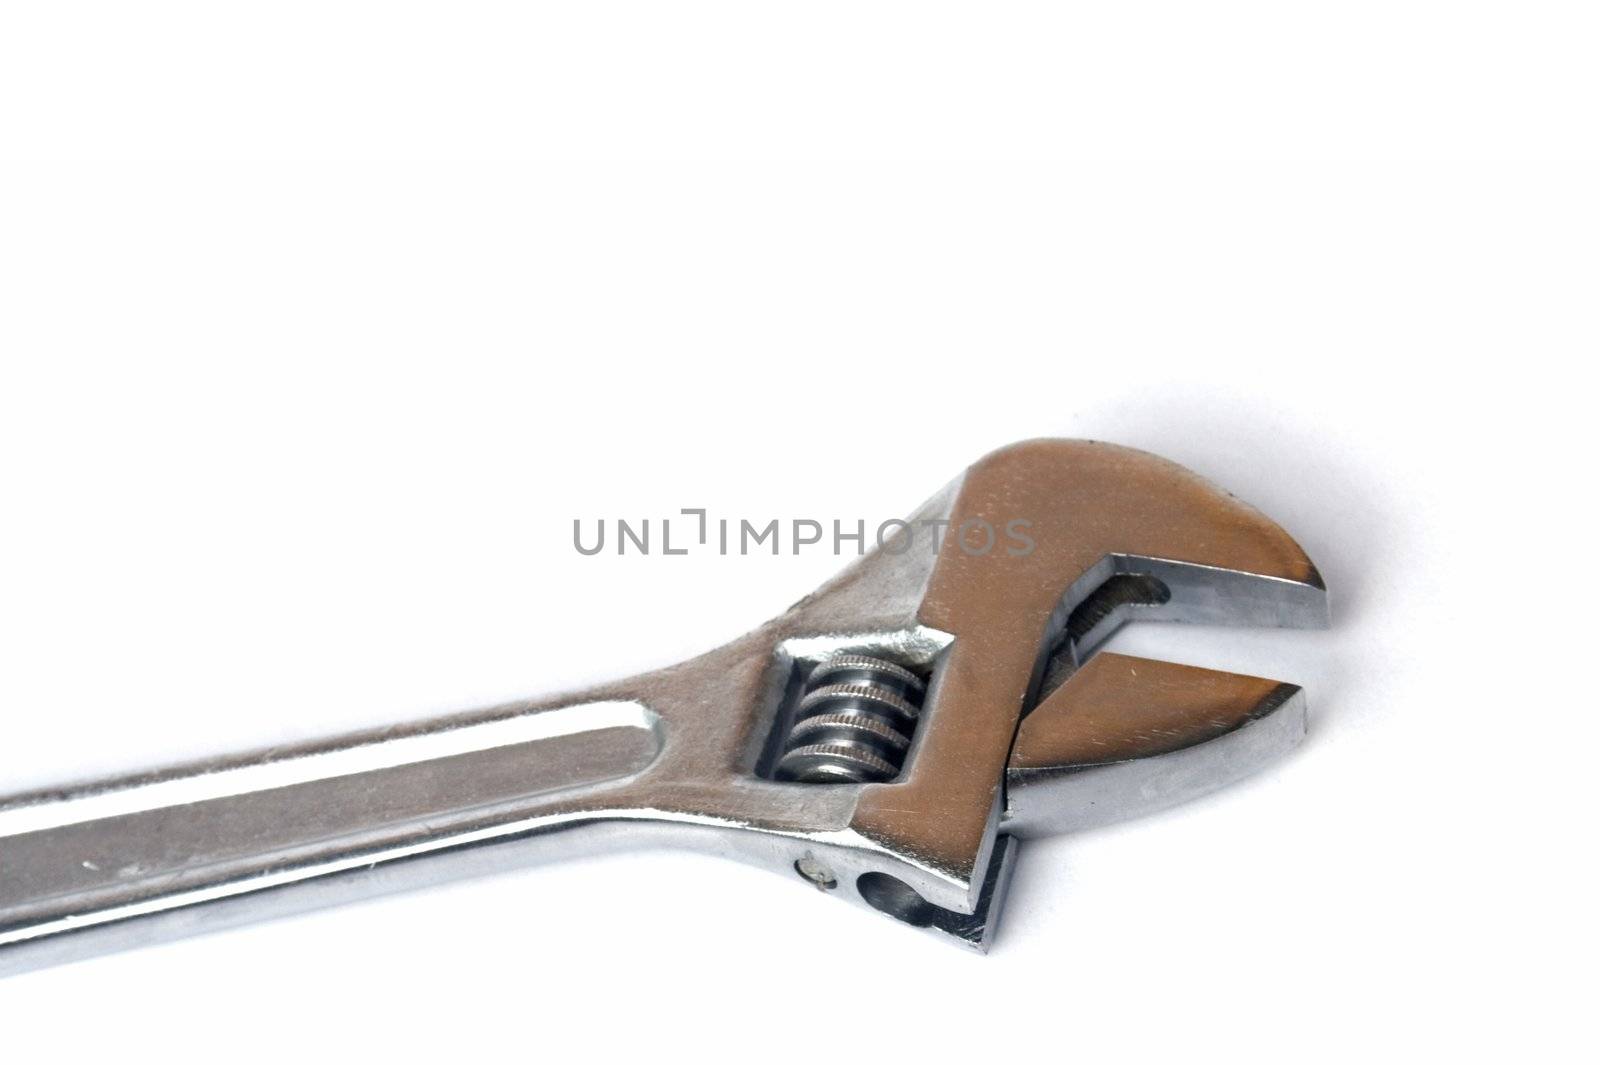 Standard chromed crescent wrench isolated against white background